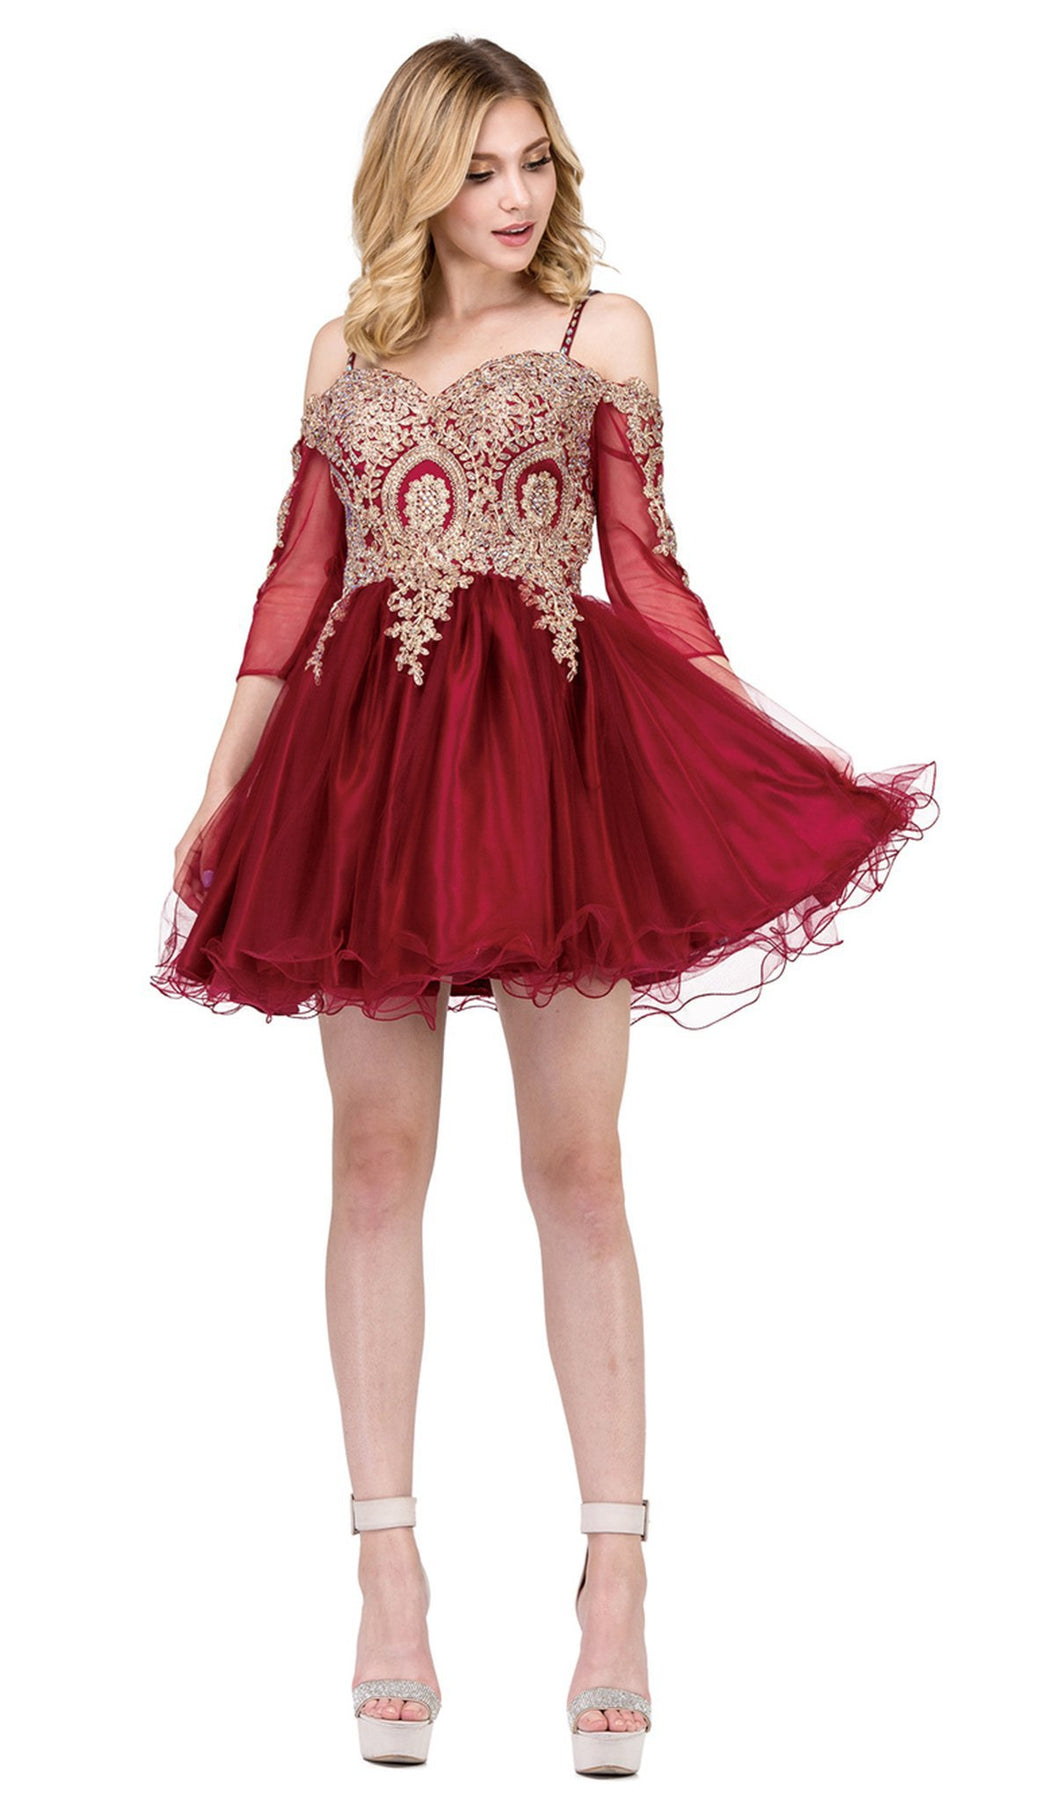 Dancing Queen - 3001 Cold Shoulder Gold Lace Applique Cocktail Dress In Red